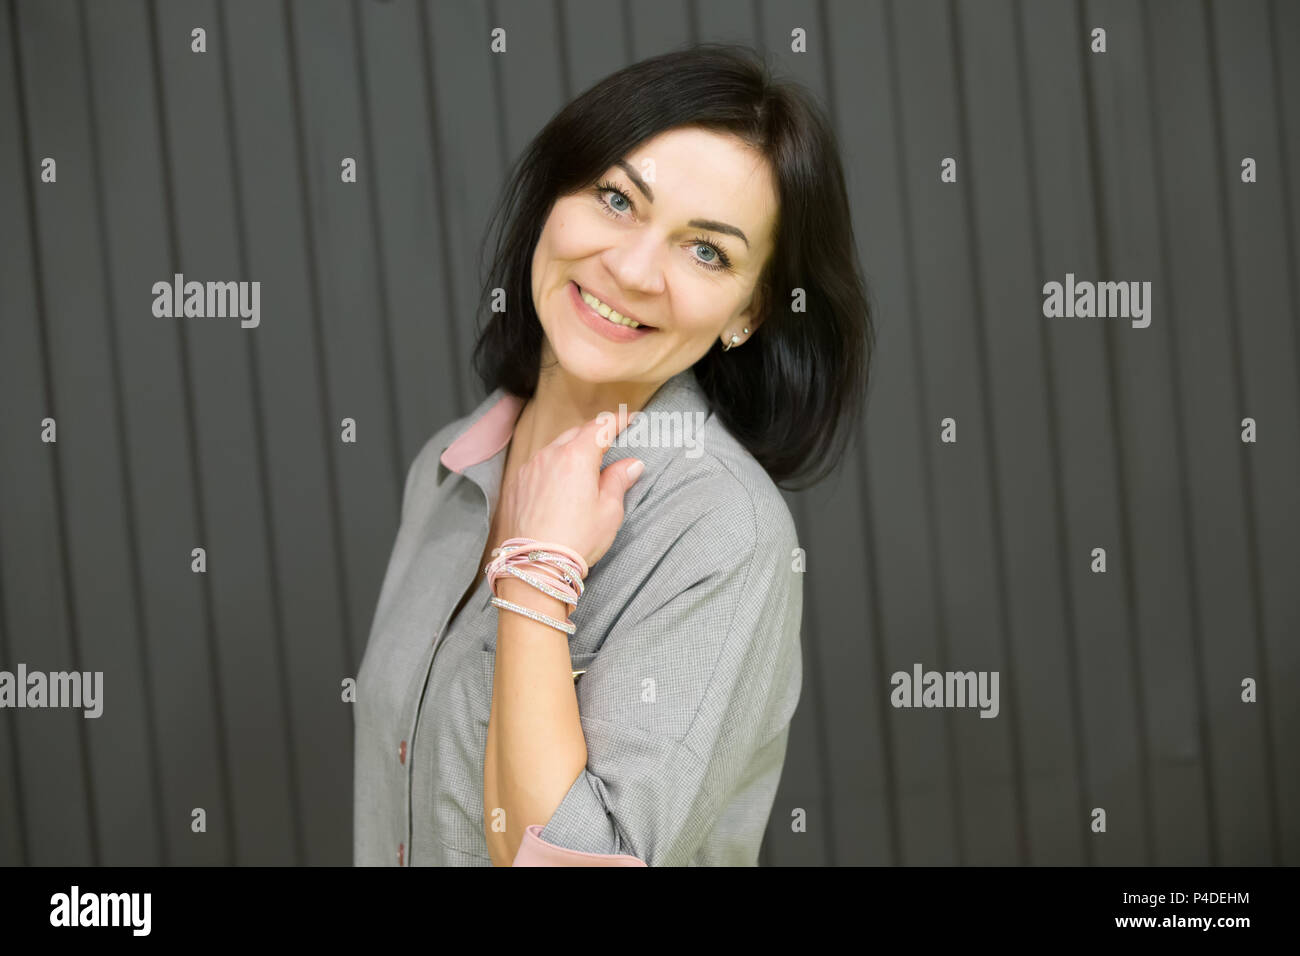 https://c8.alamy.com/comp/P4DEHM/belarus-the-city-of-gomel-on-february-28-2018-entertainment-center-in-the-gomel-hypermarketportrait-of-a-forty-year-old-beautiful-brunette-woman-P4DEHM.jpg